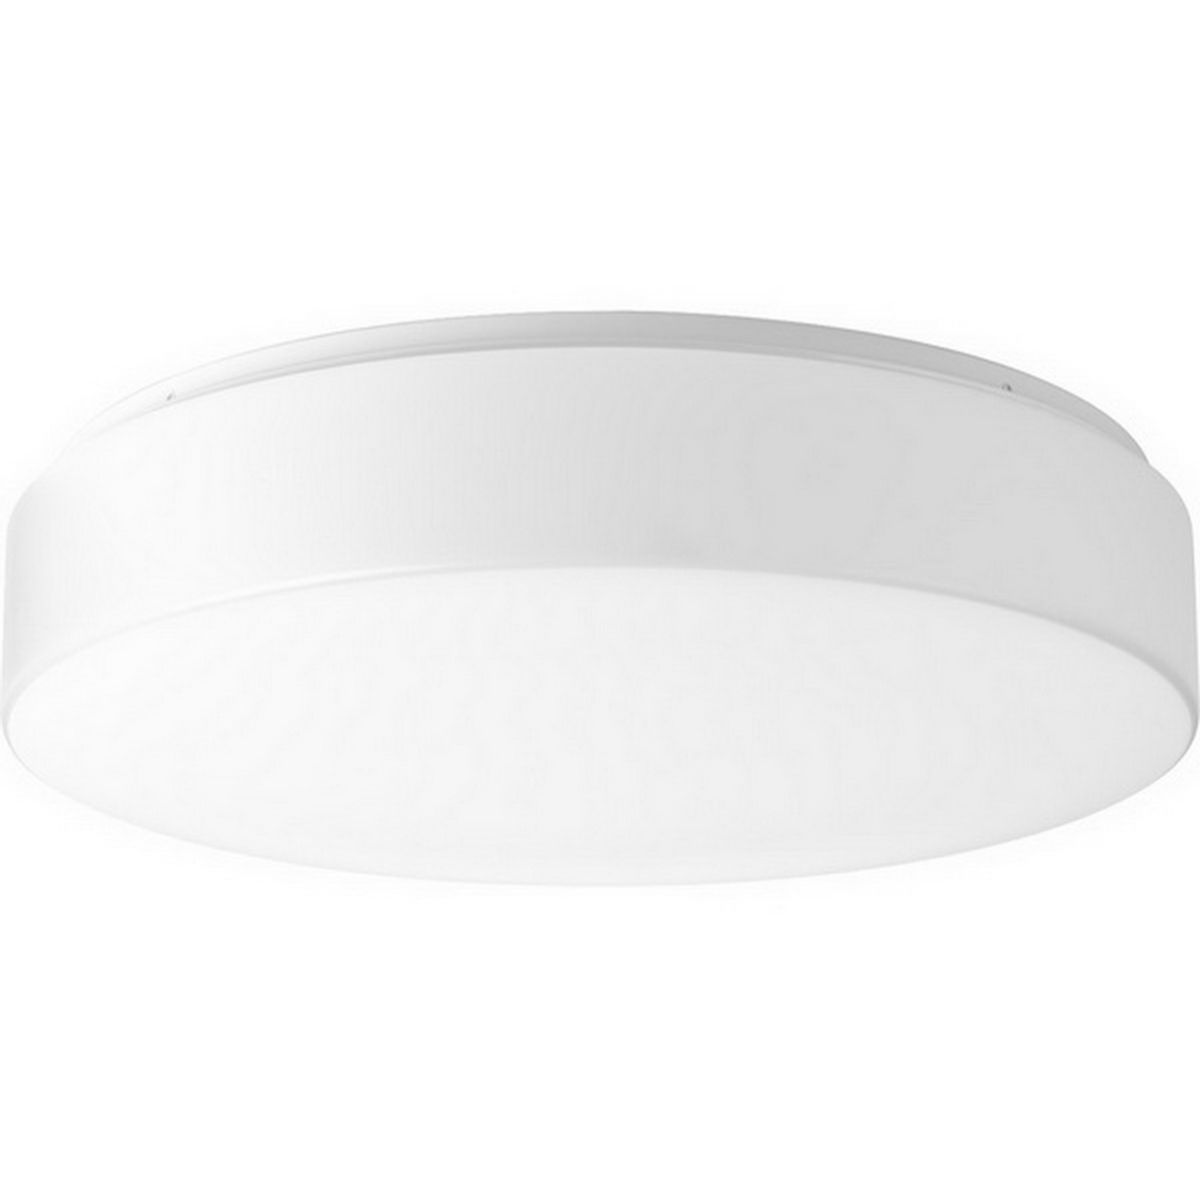 Drums and Clouds 17 in LED Flush Mount Light White finish - Bees Lighting